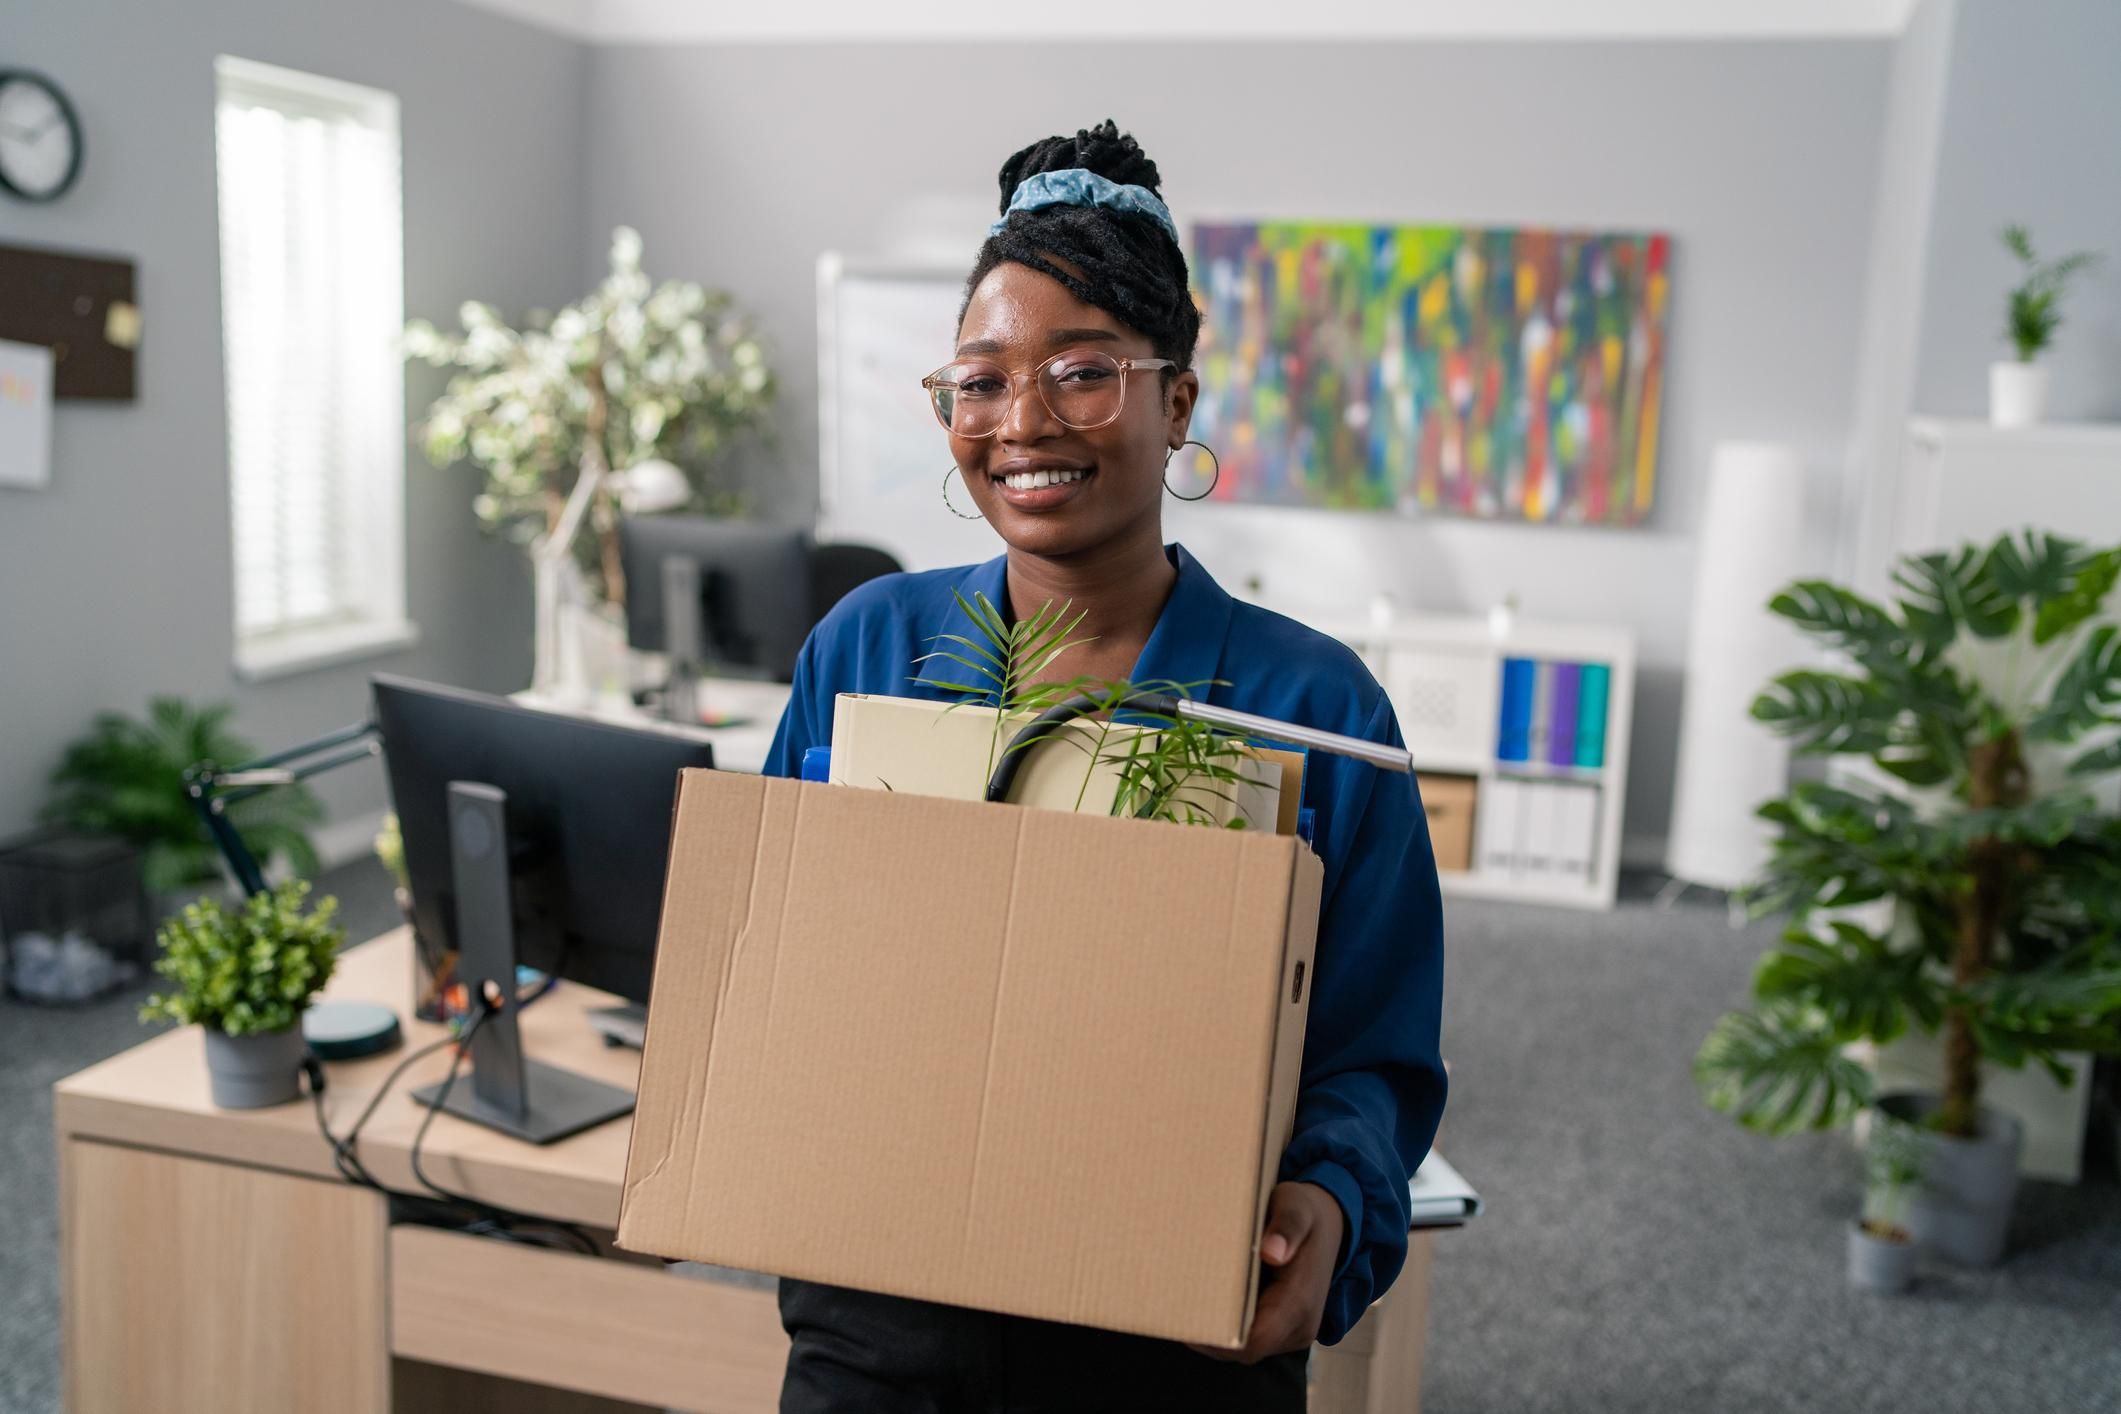 Black woman smiling with box of things from her office space